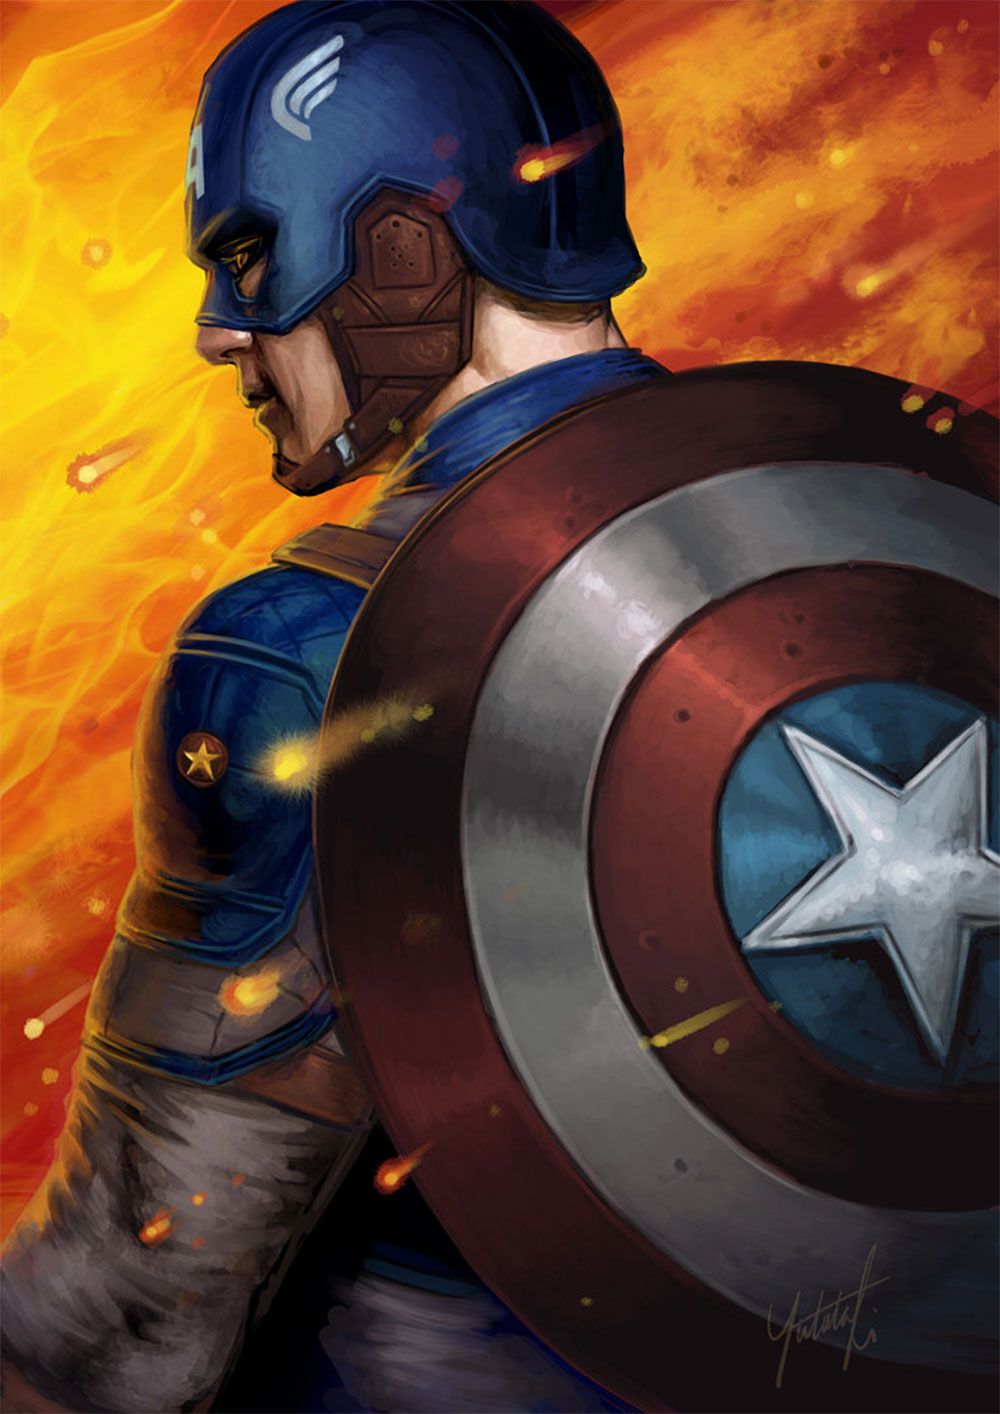 Get This Man A Shield 10 Of The Best Captain America Fan Art Pieces On The Internet